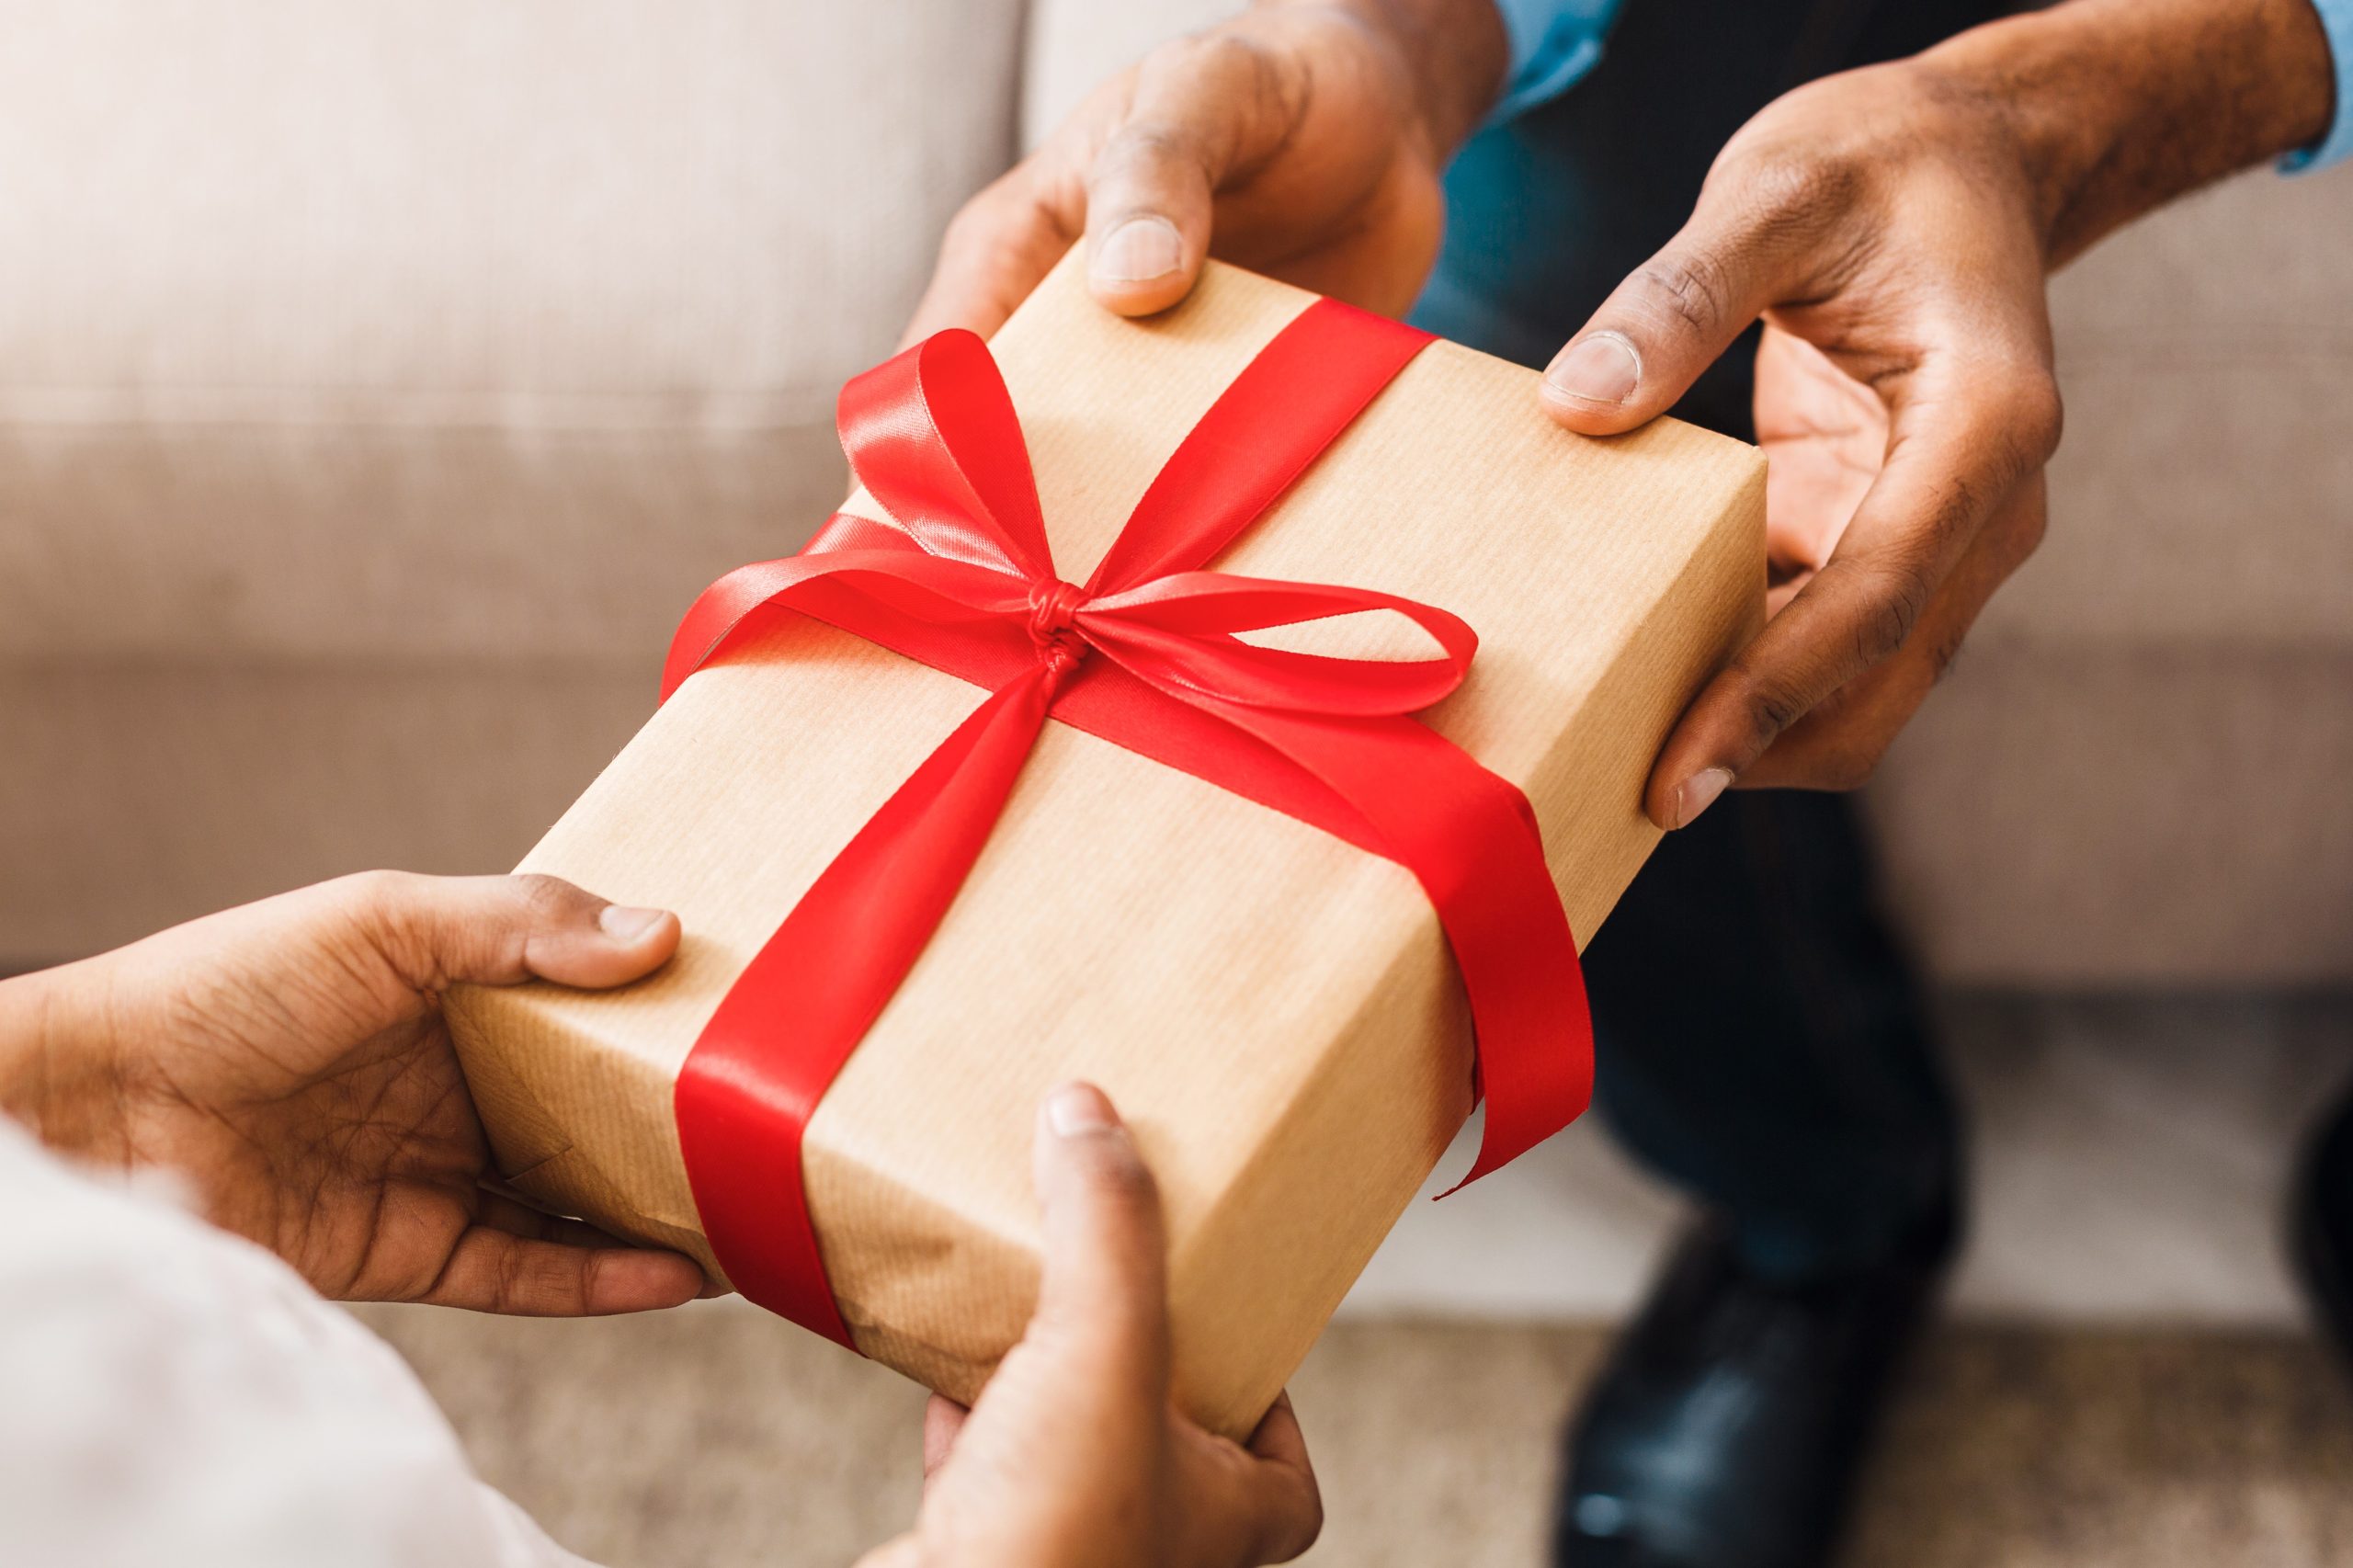 Two people exchanging a gift wrapped in brown paper with a red ribbon. only their hands are visible.